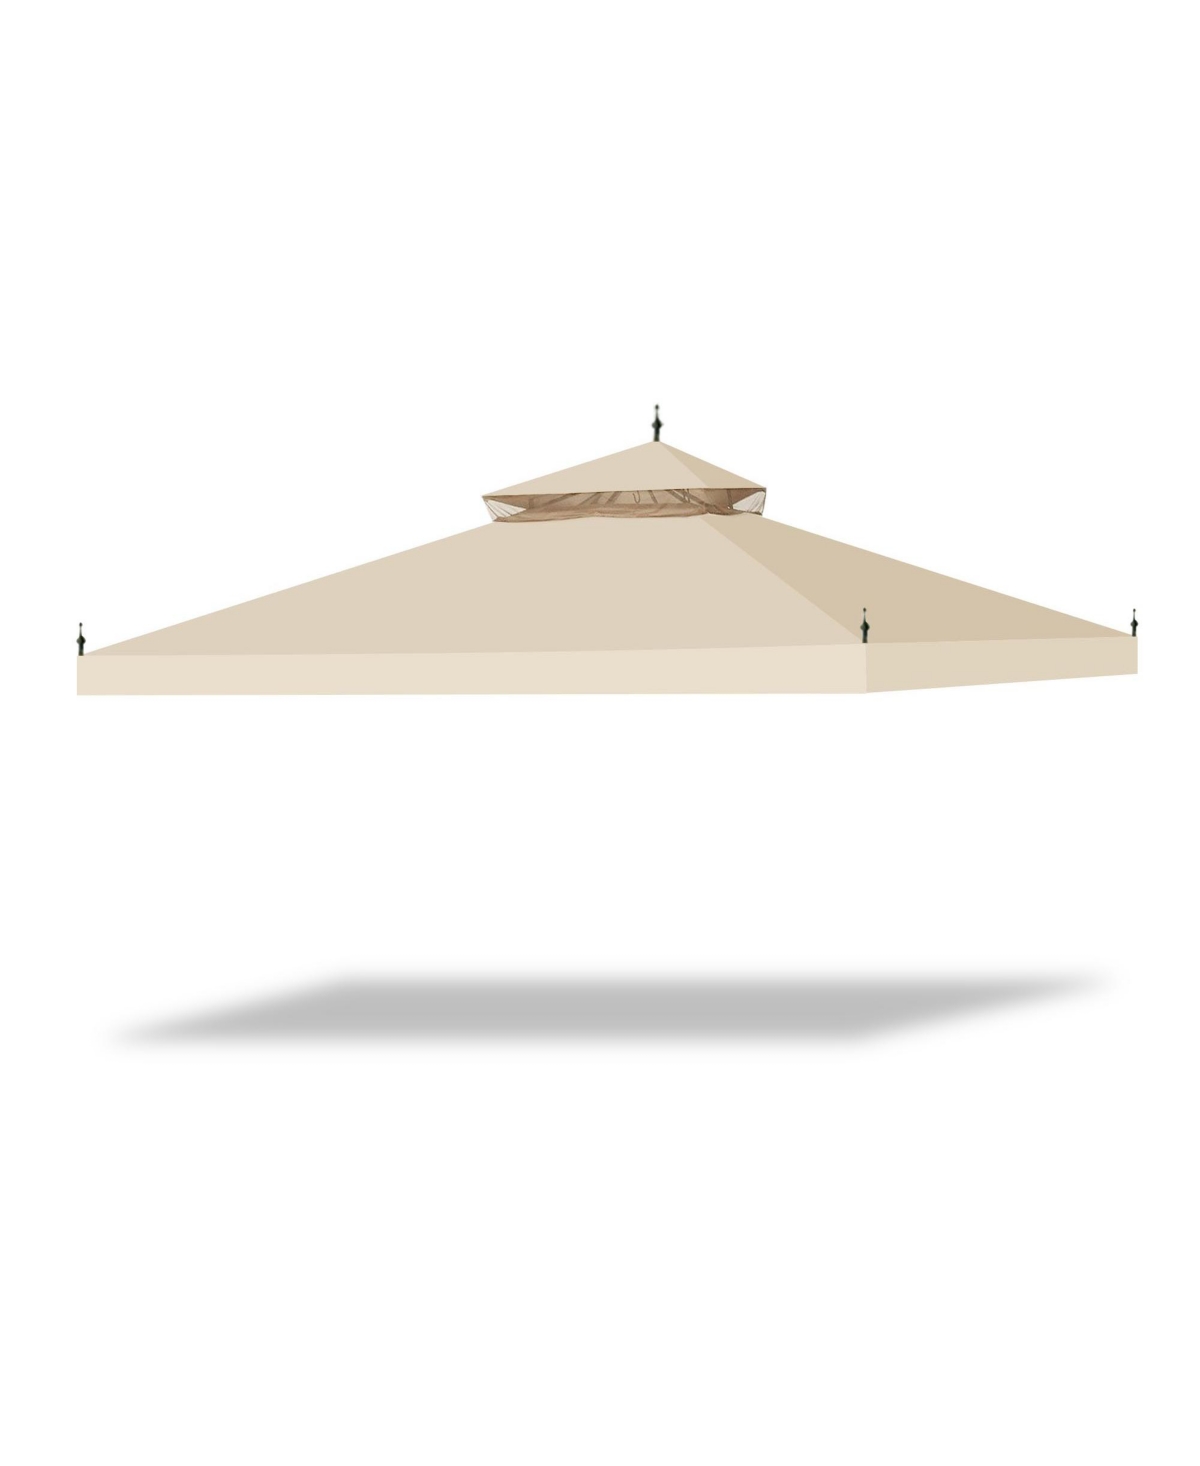 10'x10' Water Resistant Canopy Top Replacement for Arrow Gazebo Dual Tier Beige MS17-301-004-20 - Tan